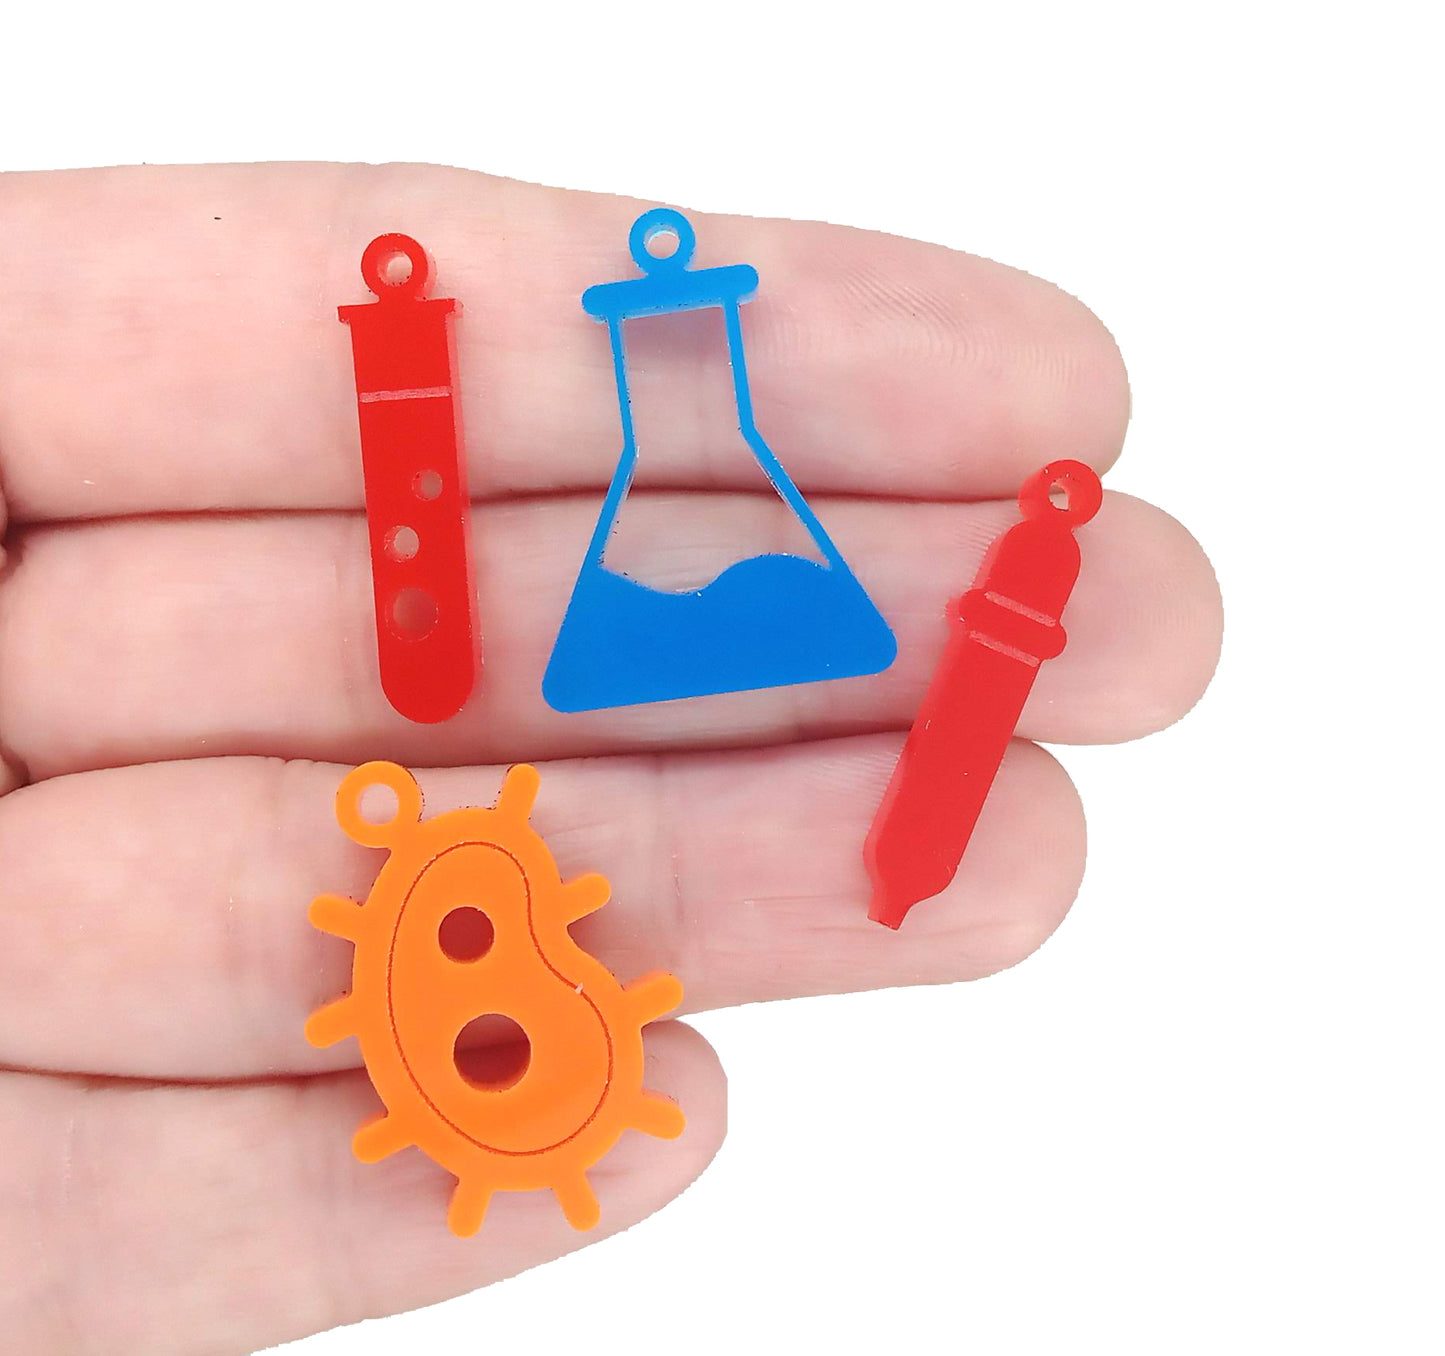 Tiny Pipette Charms, set of 4 - Adorabilities Charms & Trinkets